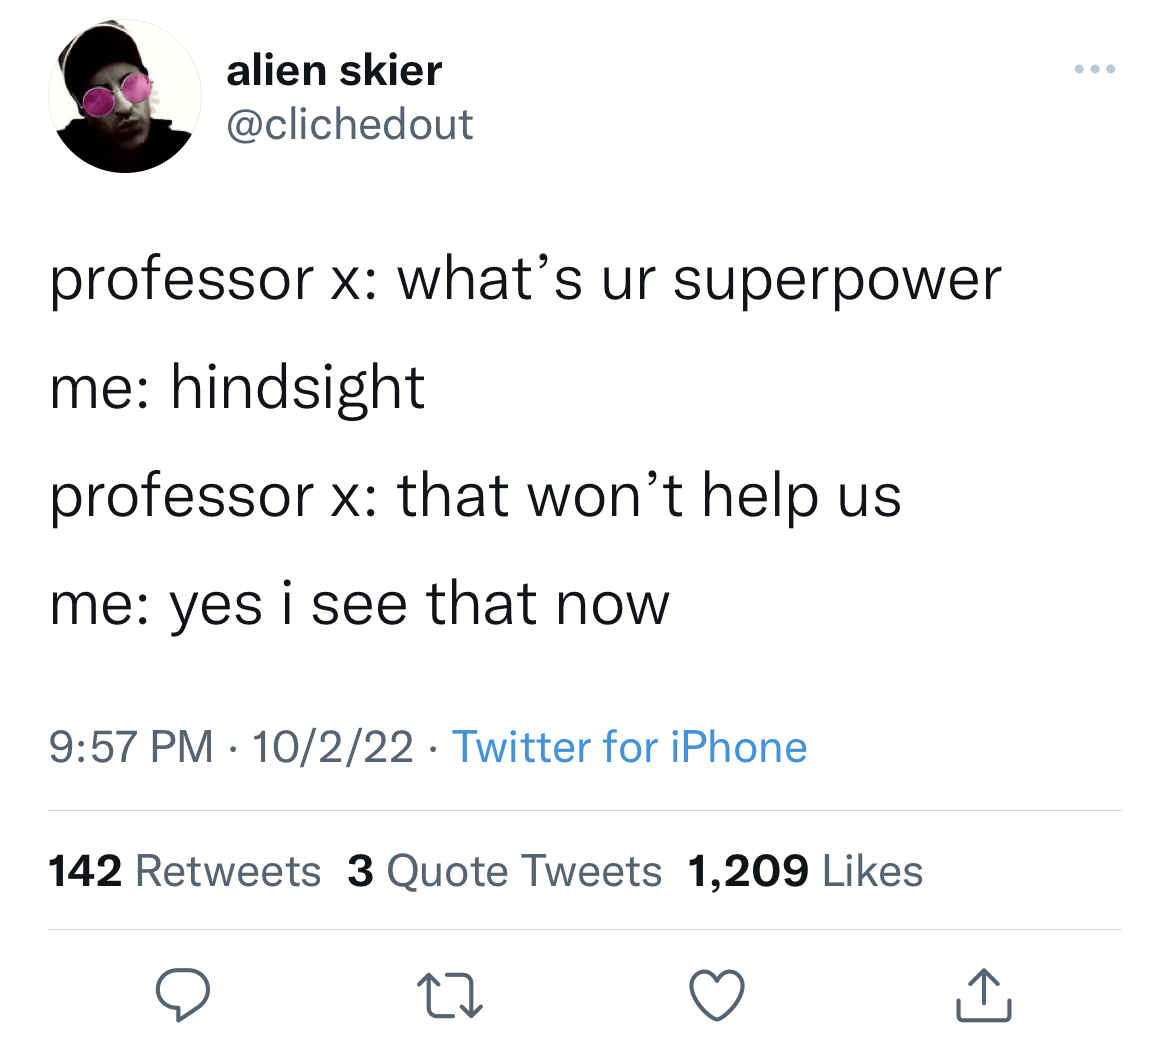 Savage and funny tweets - ranboo funny tweets - alien skier professor x what's ur superpower me hindsight professor x that won't help us me yes i see that now 10222 Twitter for iPhone 142 3 Quote Tweets 1,209 27